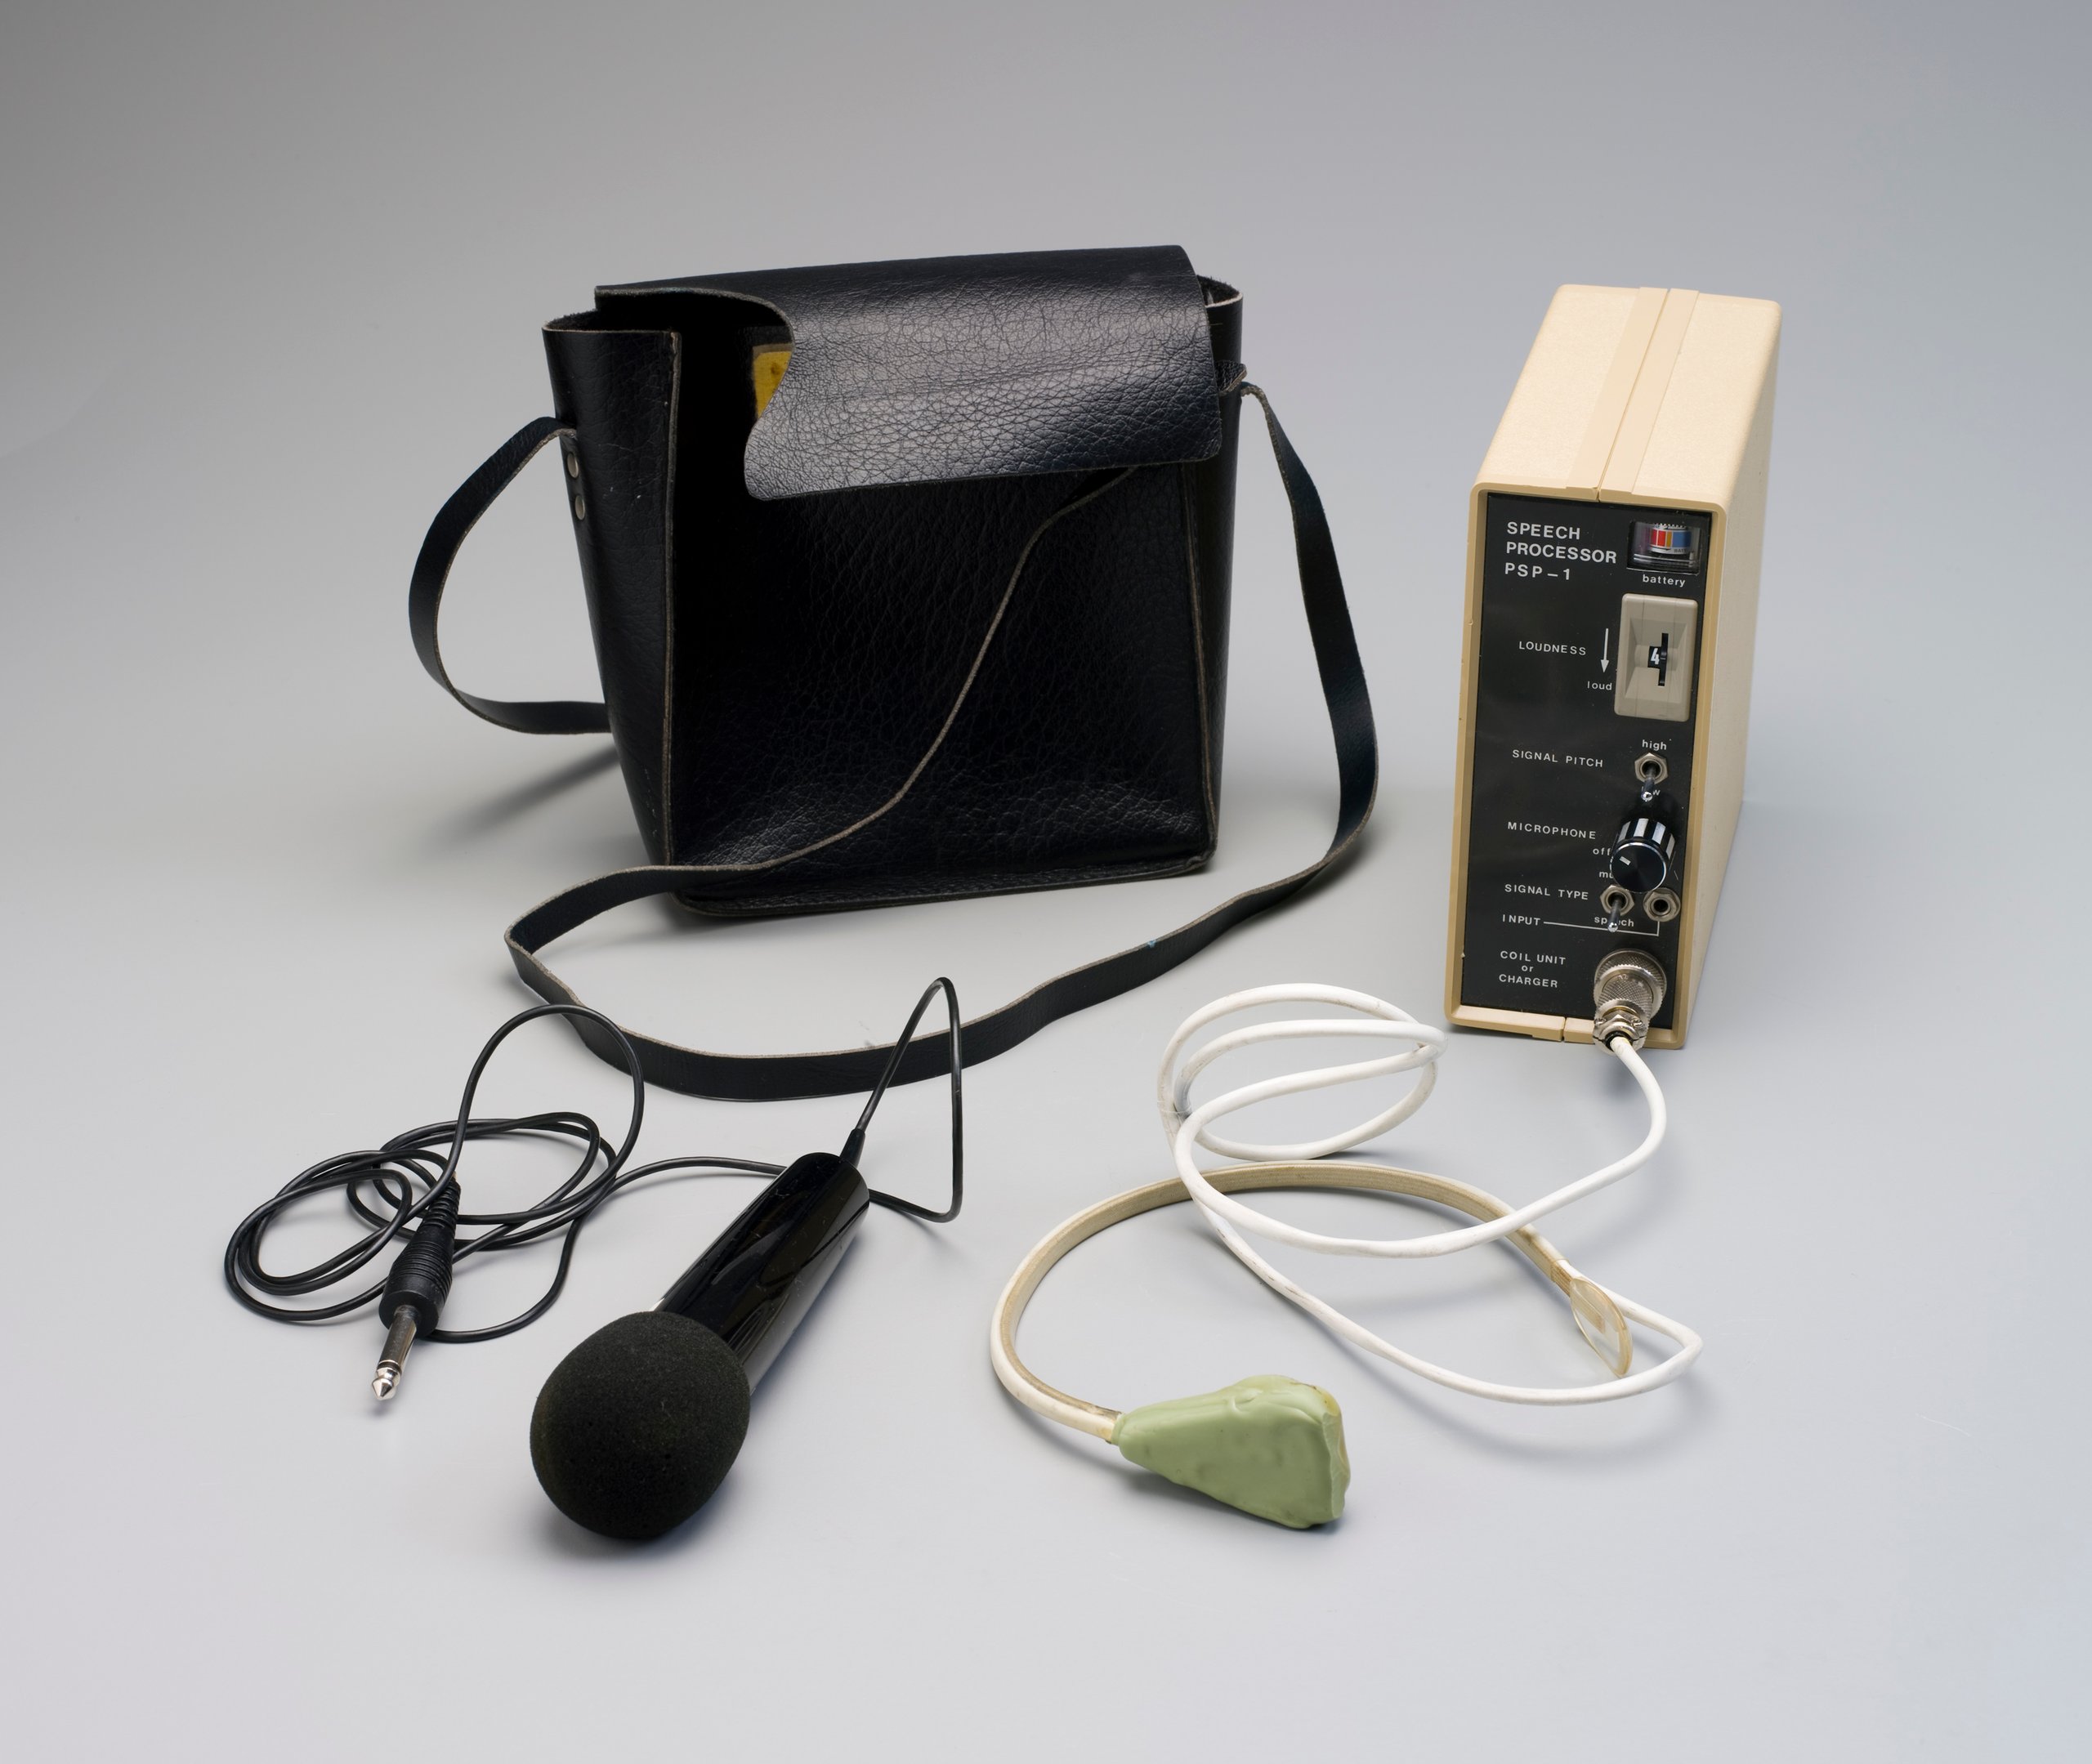 Prototype wearable speech processor for cochlear implant system